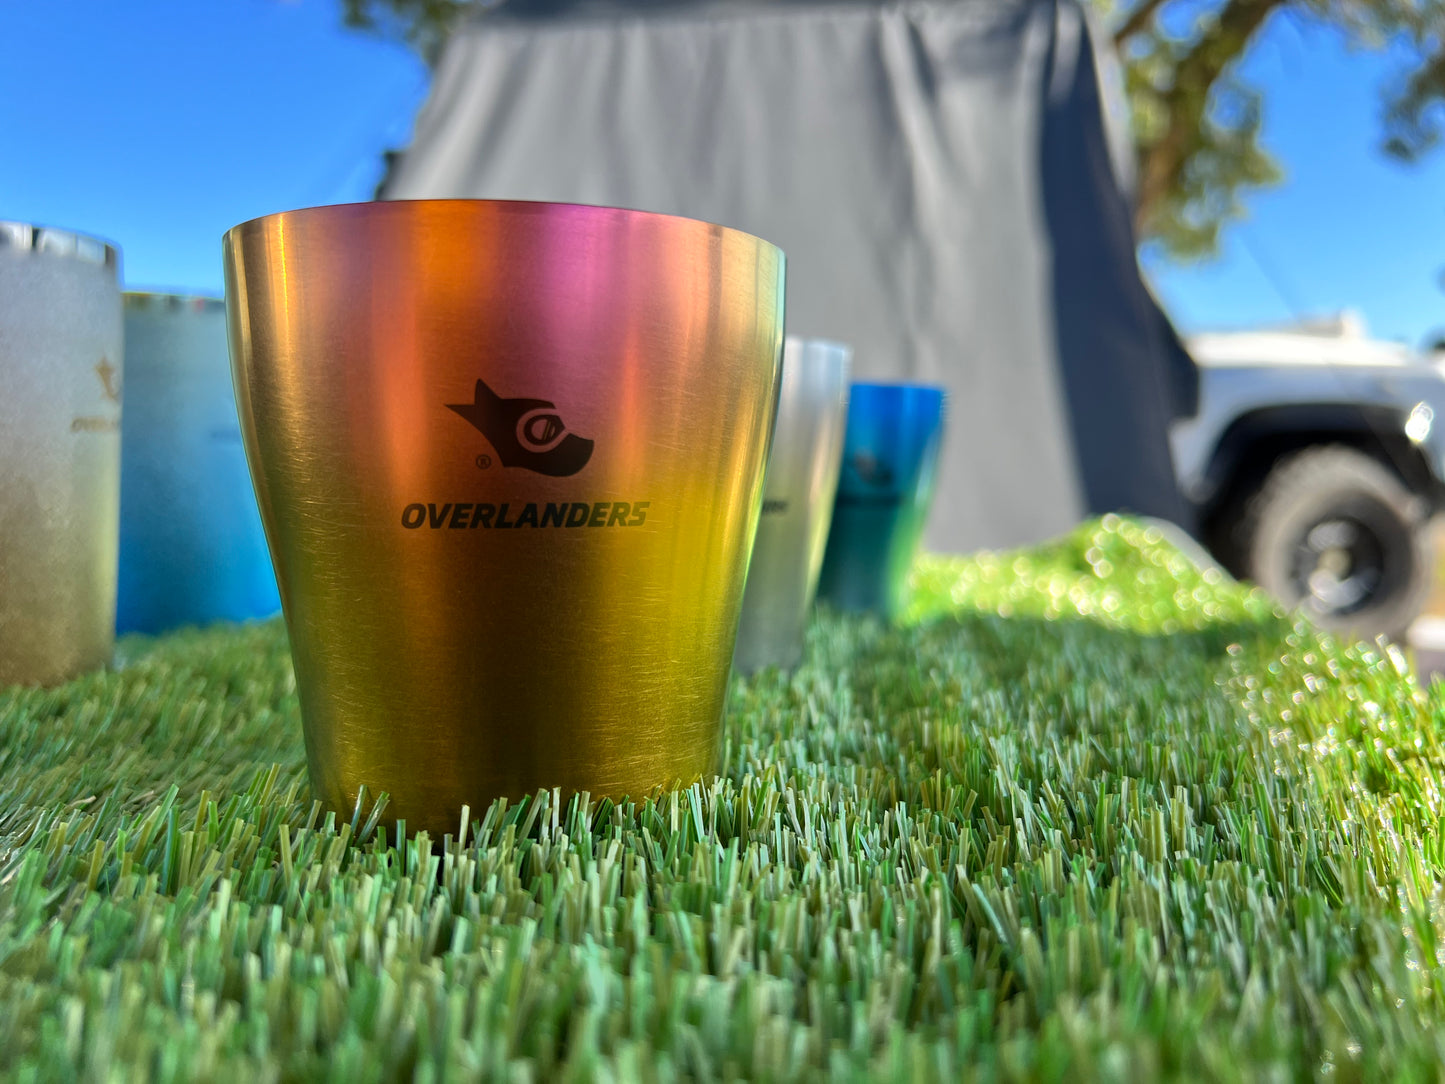 Overlanders Titanium Double-wall Cup, Pink-Gold, made in Japan